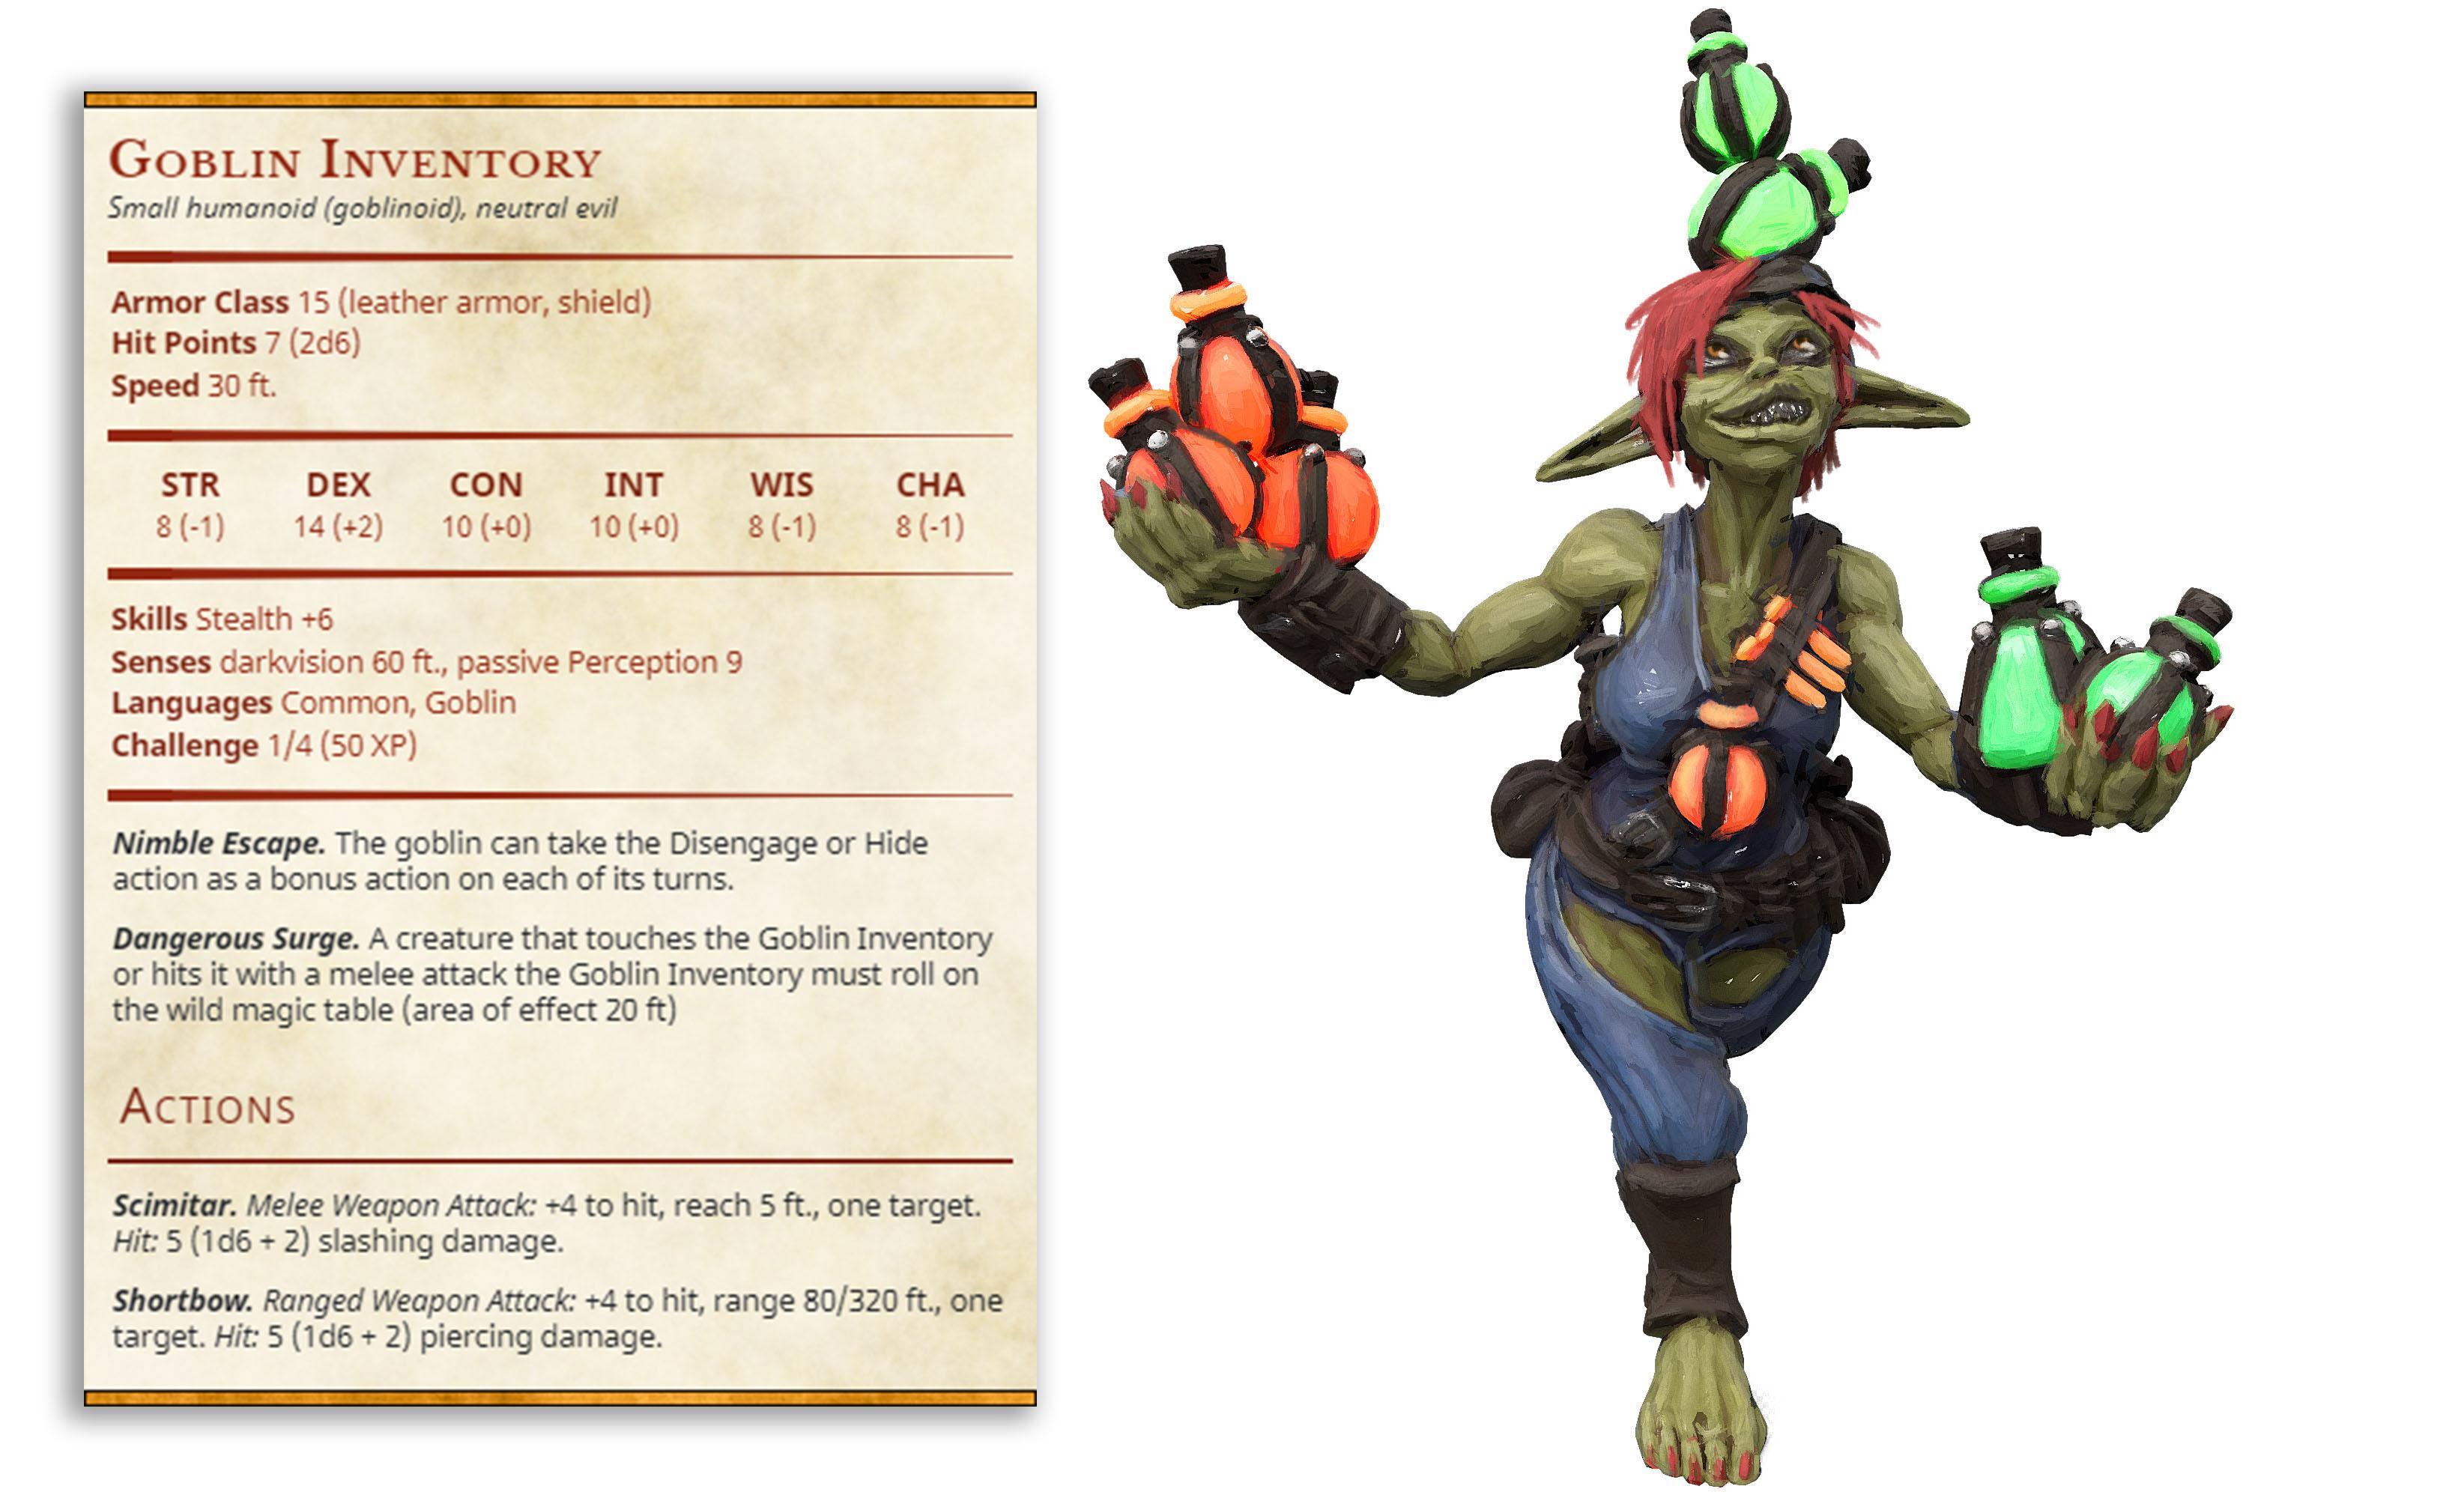 Inventory - Potions - Goblin Brewers - PRESUPPORTED - Illustrated and Stats - 32mm scale			 3d model